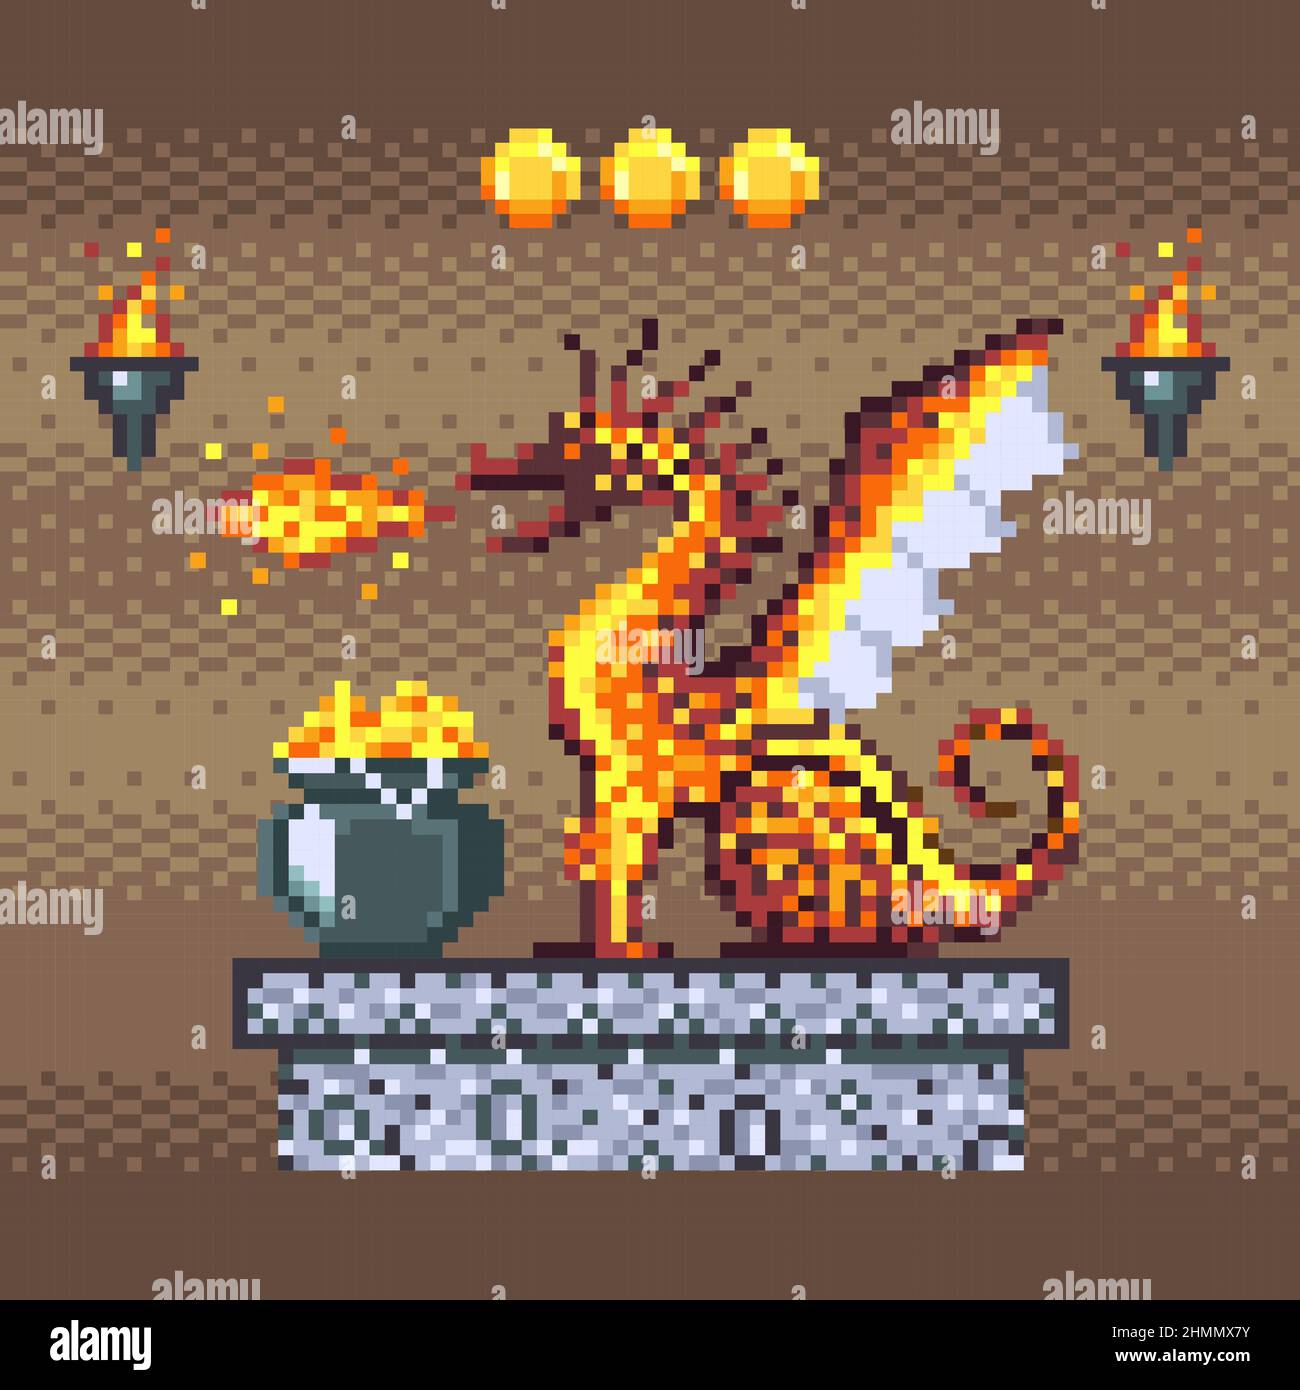 Fire Breathing Dragon Guards Treasures in Dungeon Stock Vector